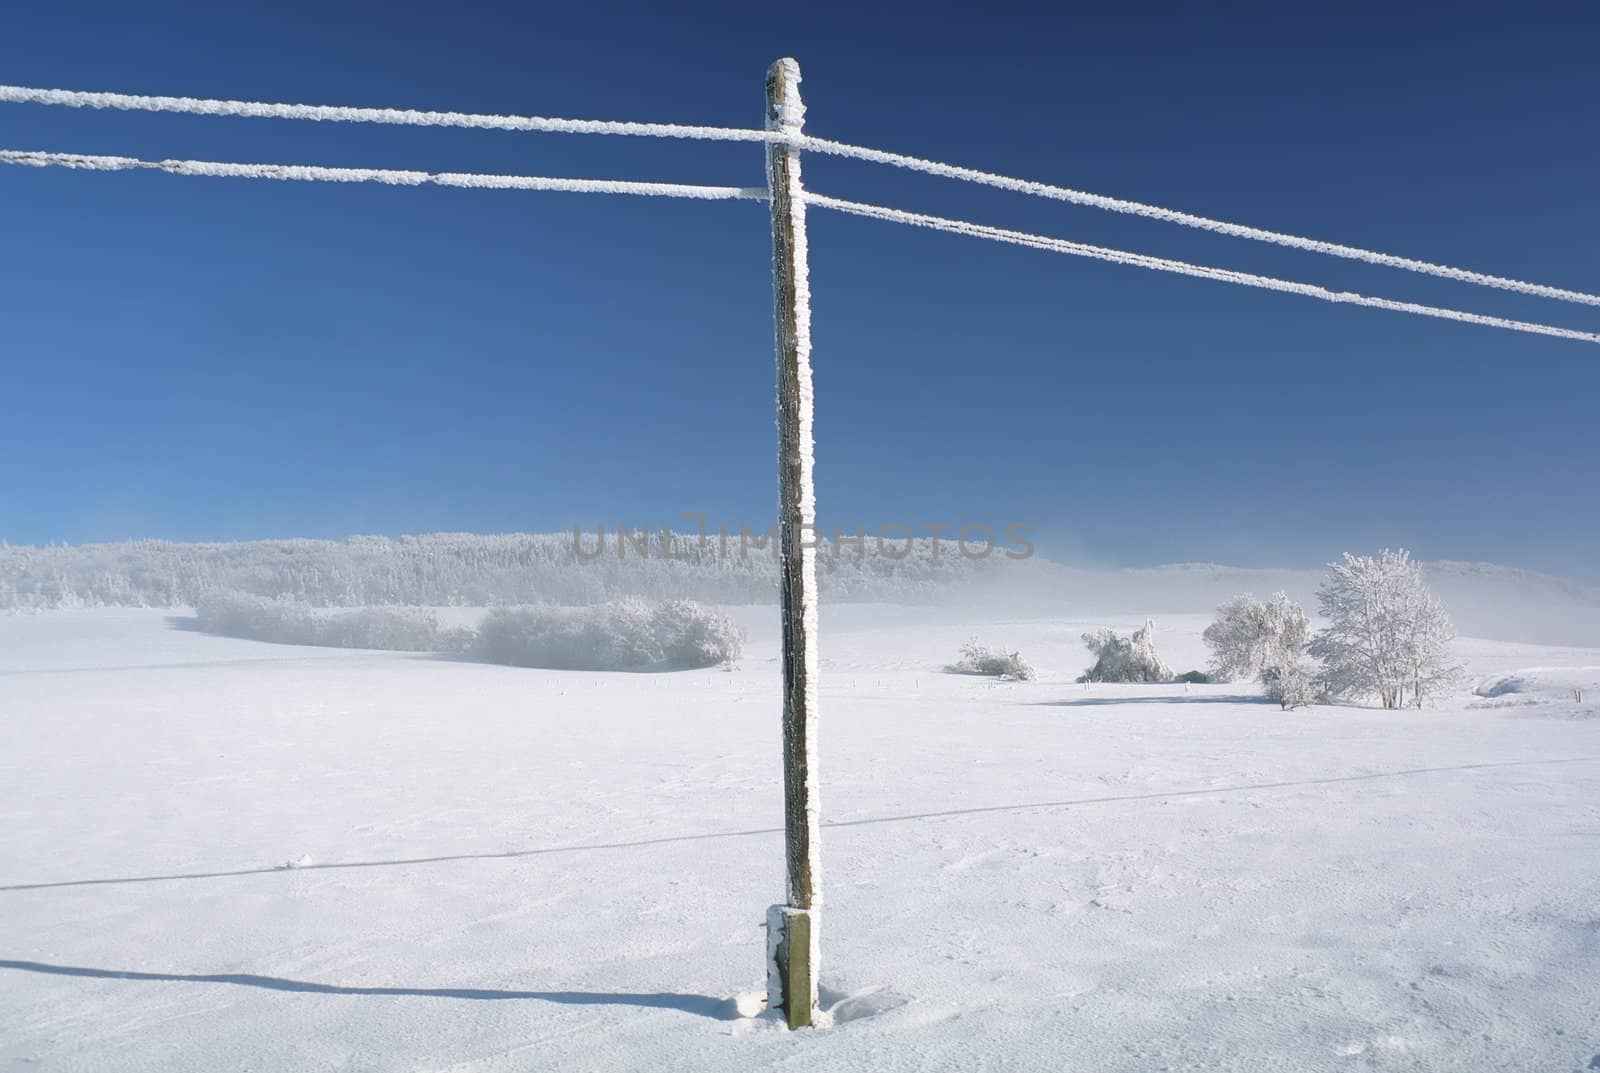 Winter lanscape with snowy telephone lines by bugno